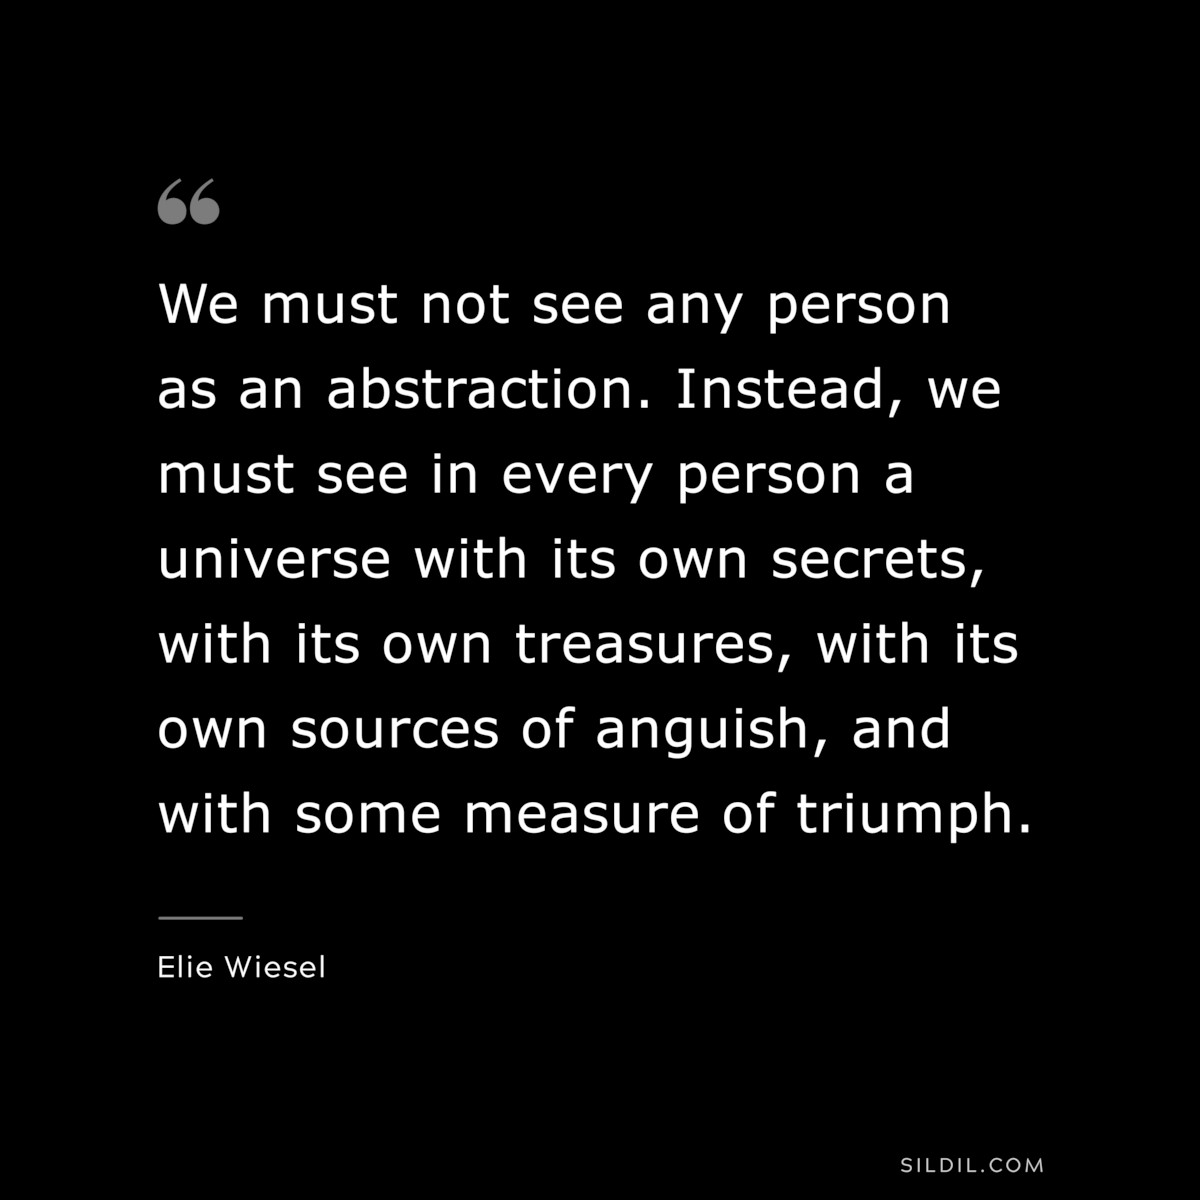 We must not see any person as an abstraction. Instead, we must see in every person a universe with its own secrets, with its own treasures, with its own sources of anguish, and with some measure of triumph. ― Elie Wiesel